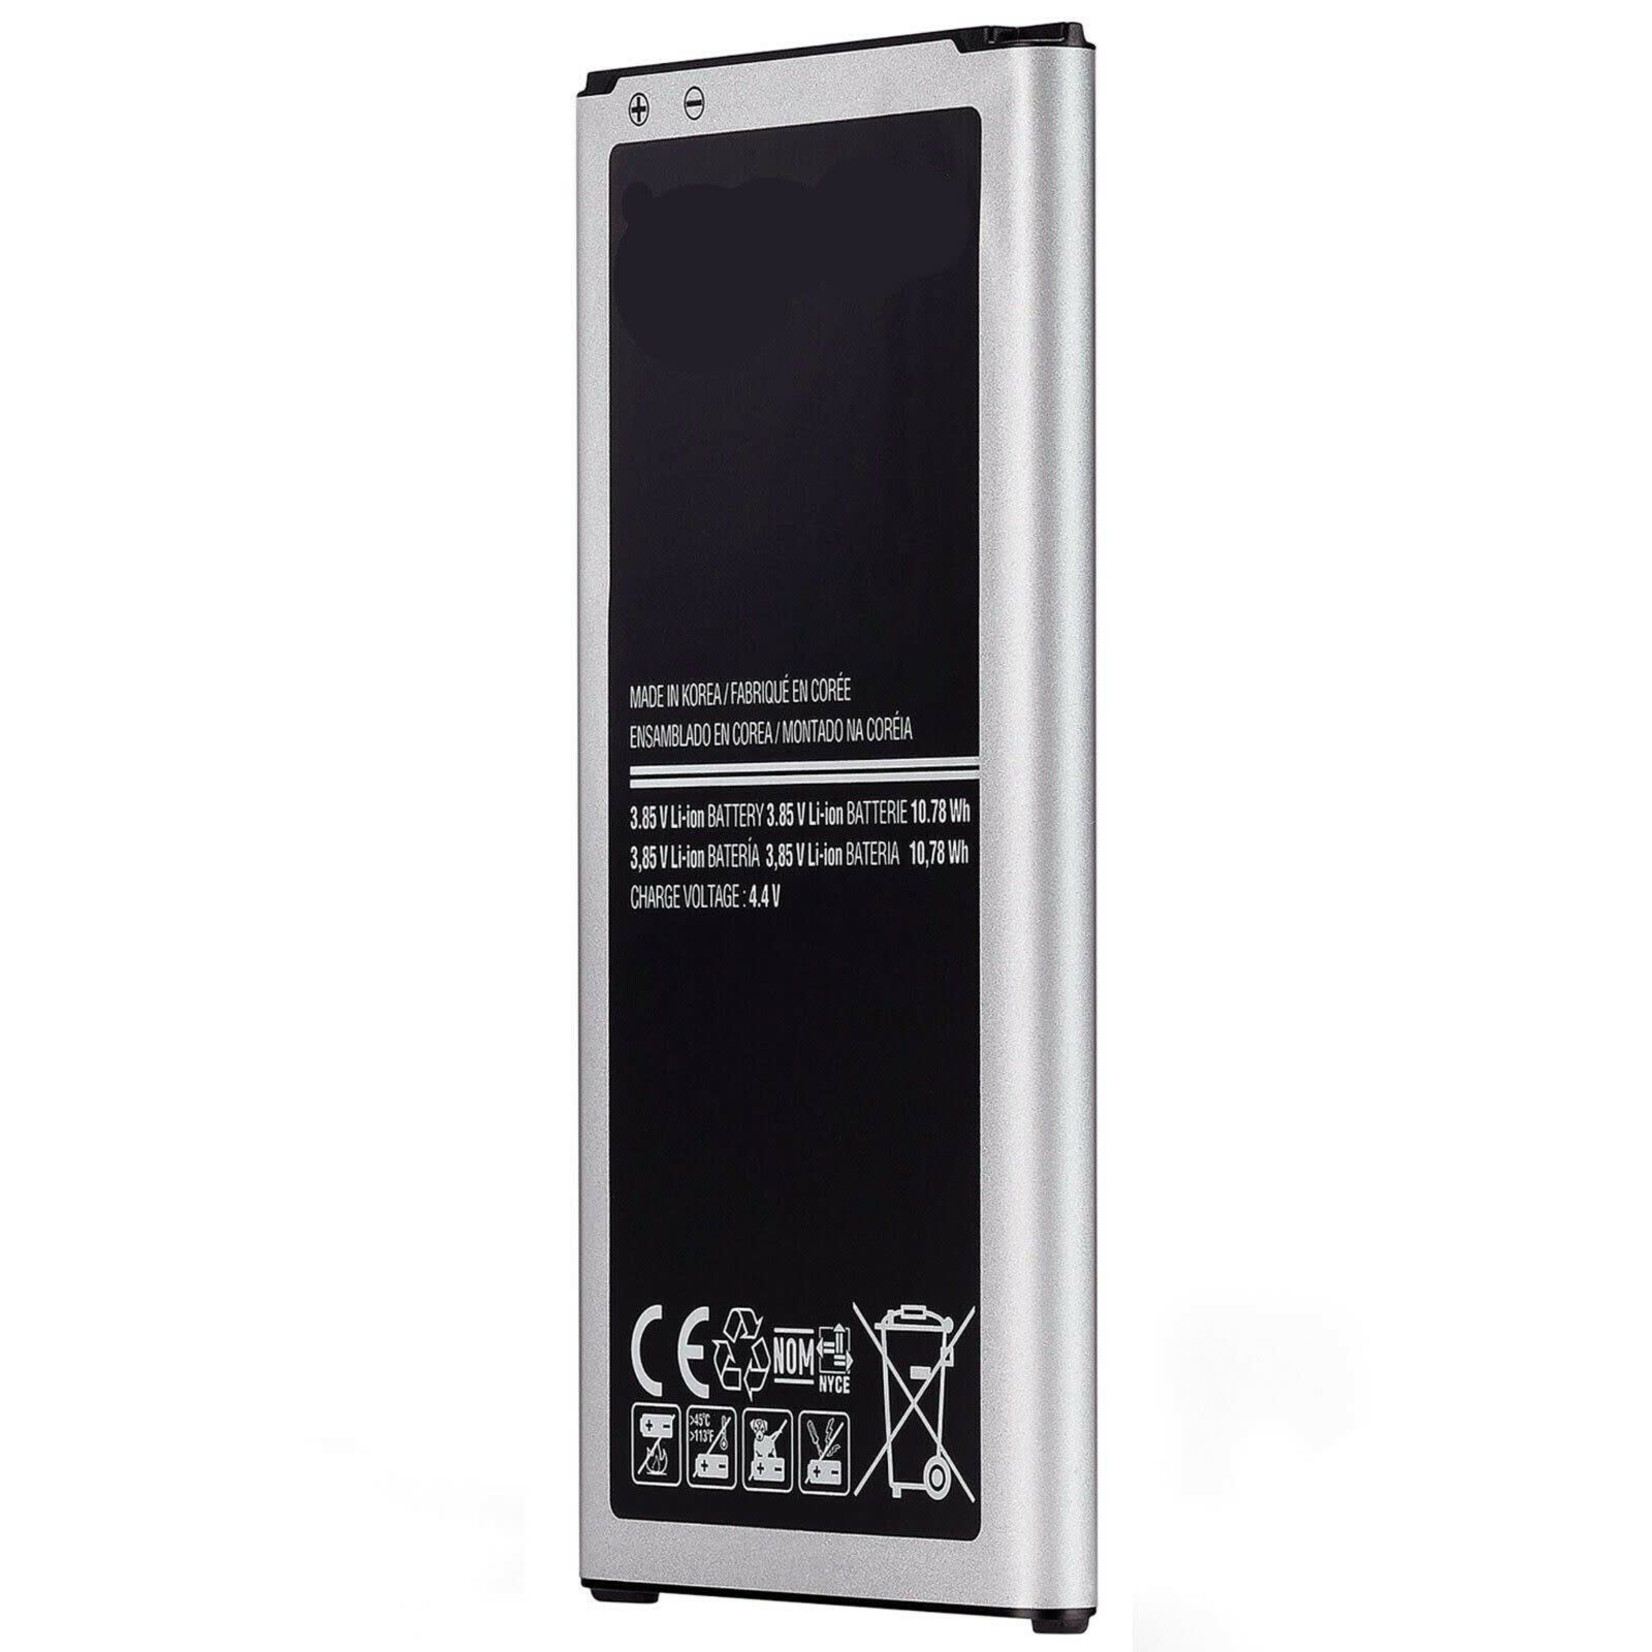 Samsung REPLACEMENT BATTERY  SAMSUNG S5 NEO/S5